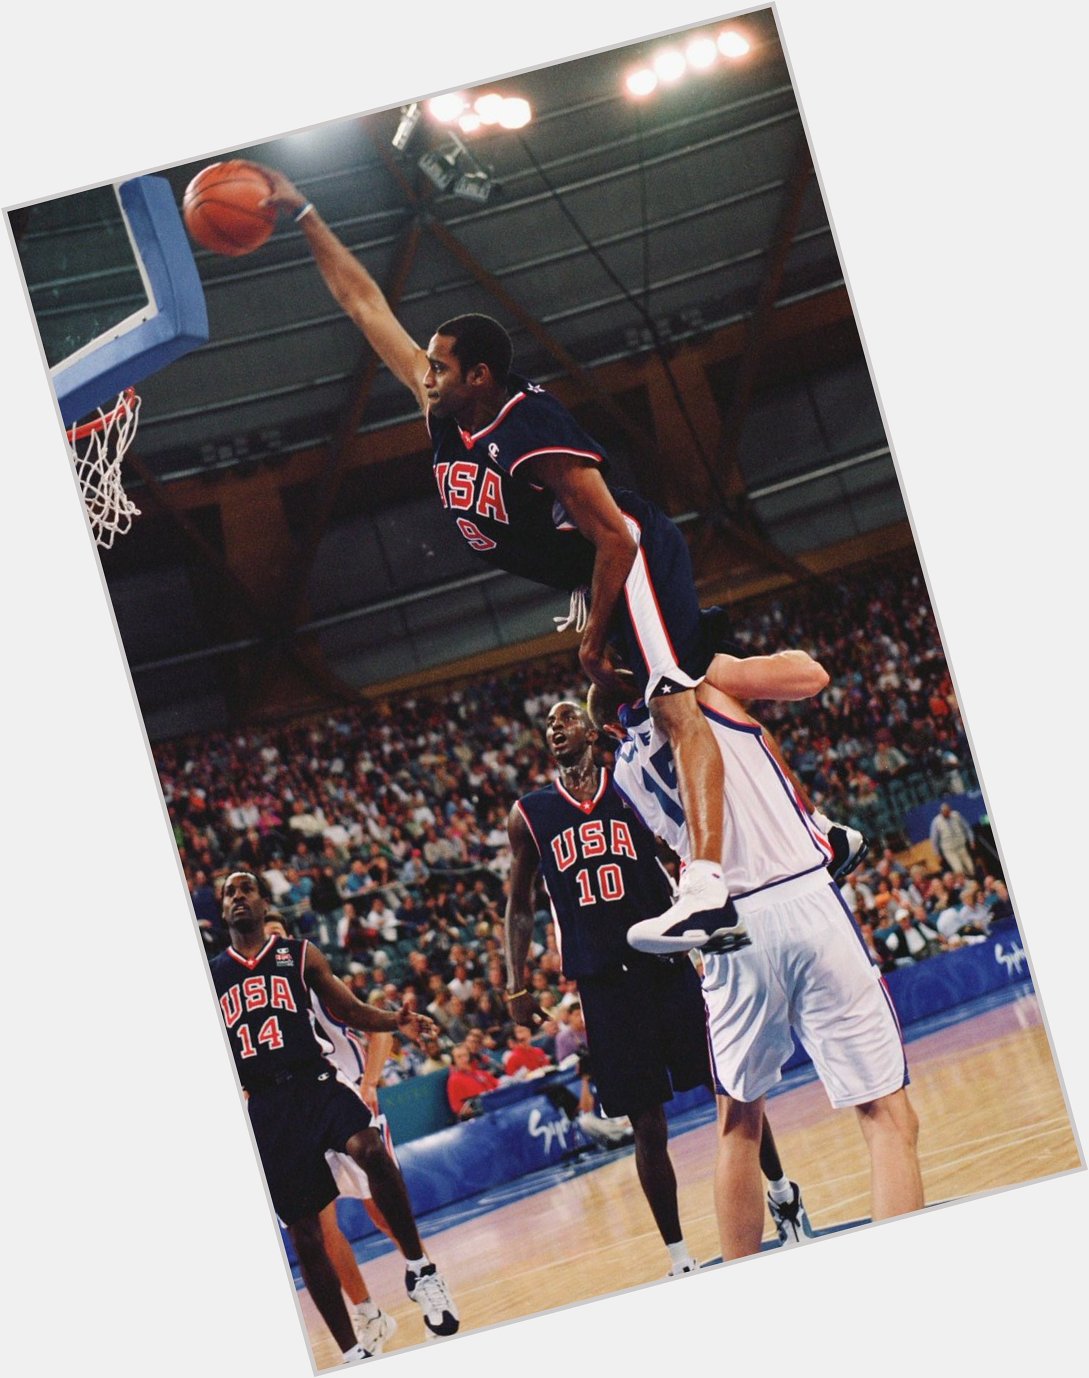 Happy 42nd Birthday to Vince Carter! 